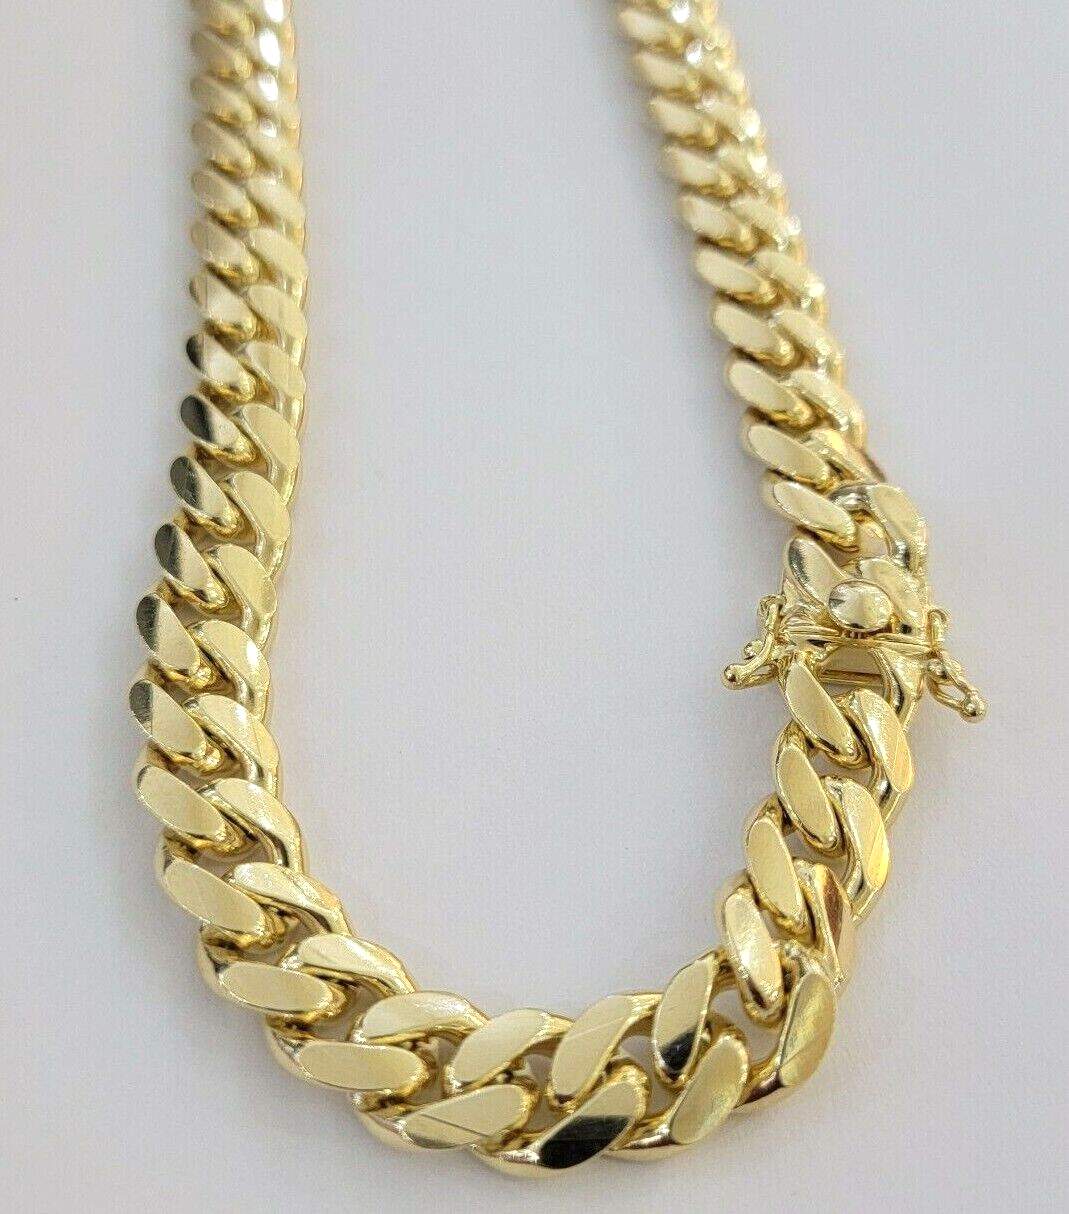 Real 10k Yellow Gold Chain 10mm Solid Miami Cuban Link Necklace 20 Inch Choker